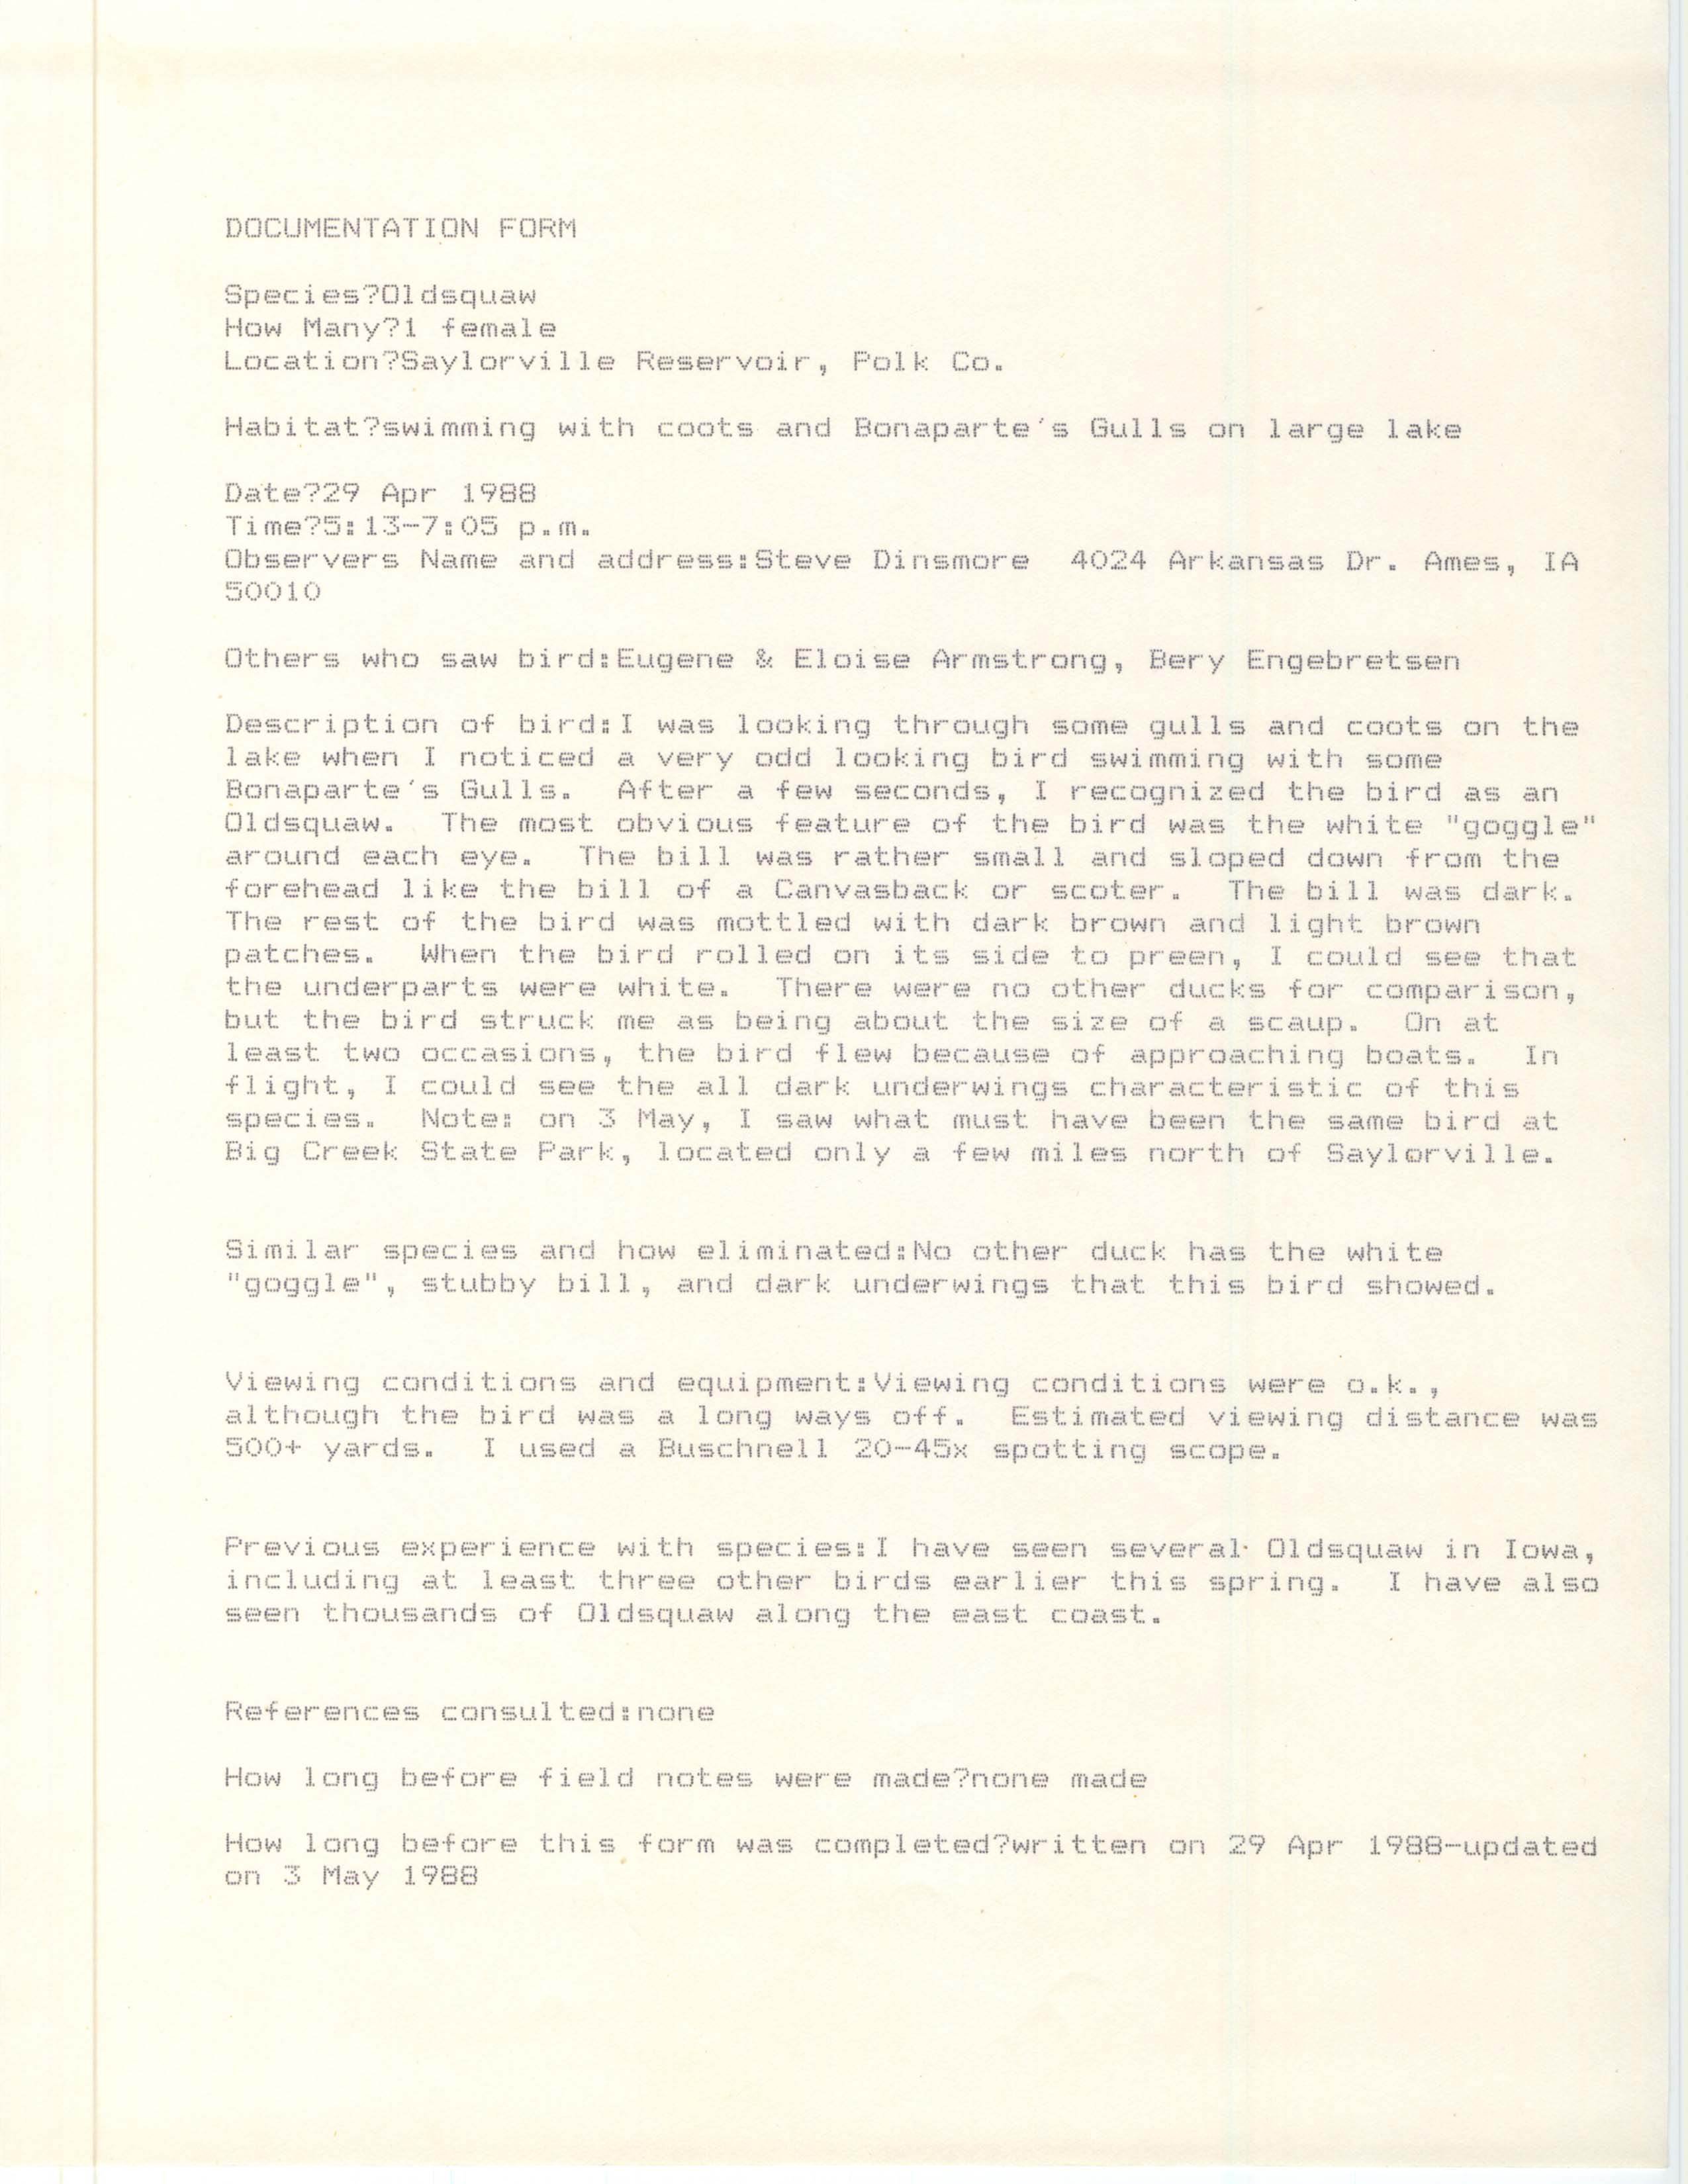 Rare bird documentation form for Long-tailed Duck at Saylorville Reservoir, 1988